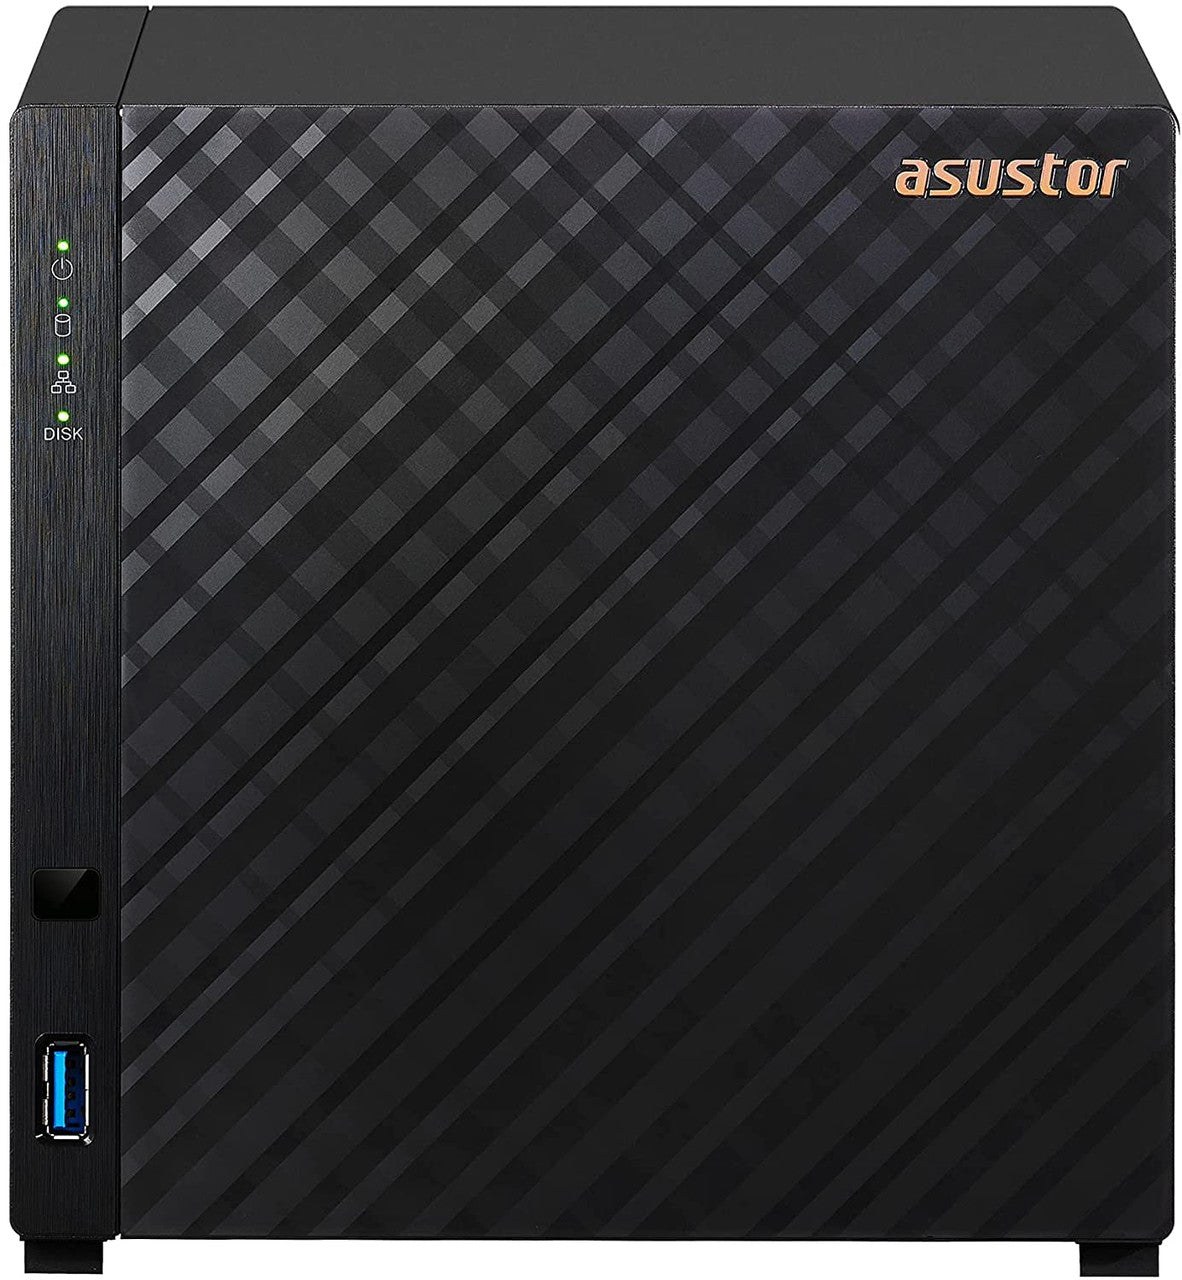 Asustor AS1104T 4-Bay Drivestor 4 NAS with 1GB RAM and 88TB (4x22TB) Western Digital RED PRO Drives